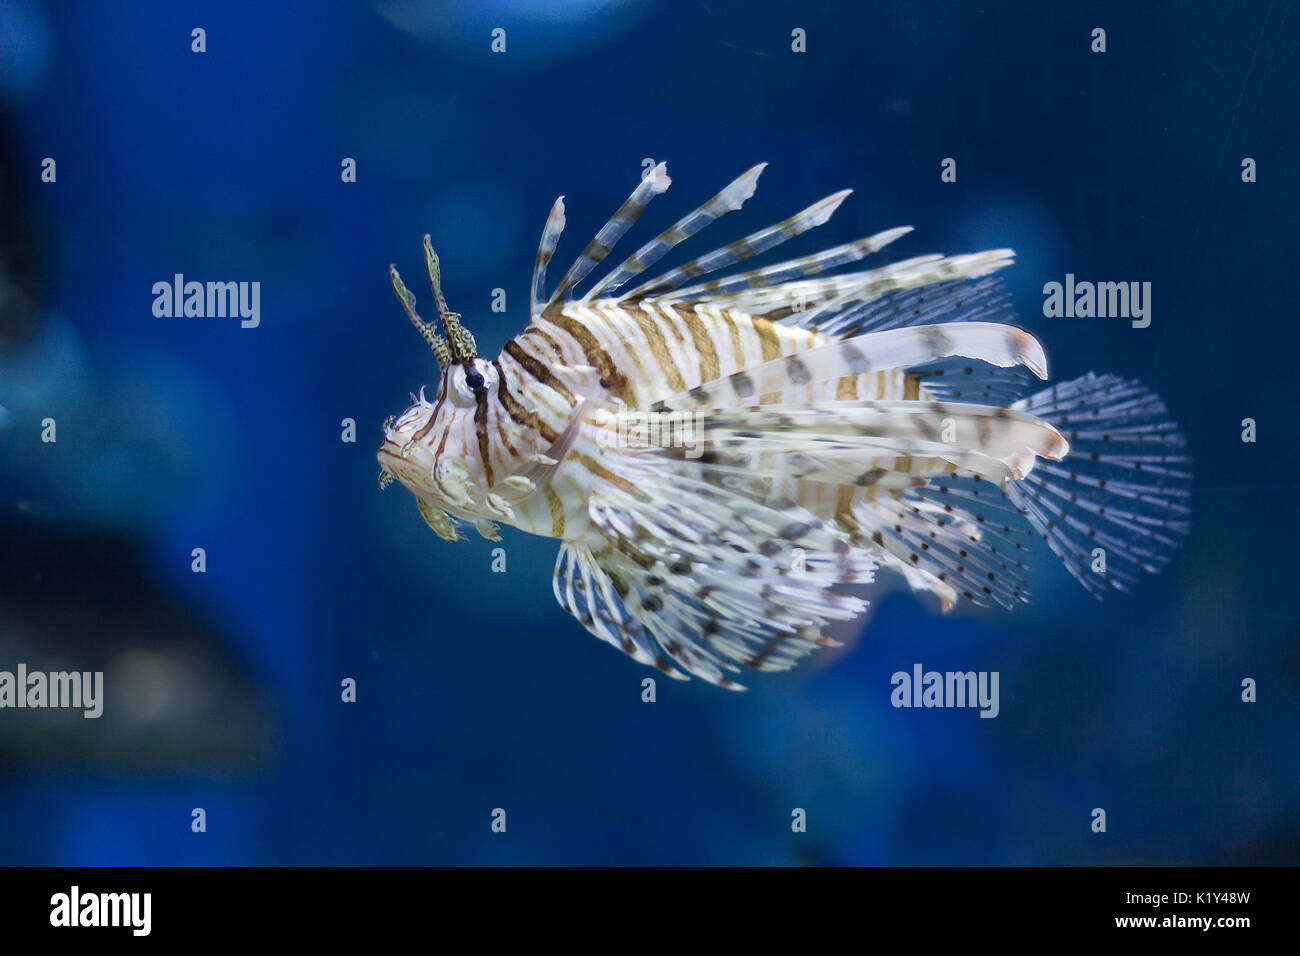 Lionfish in blue water Stock Photo